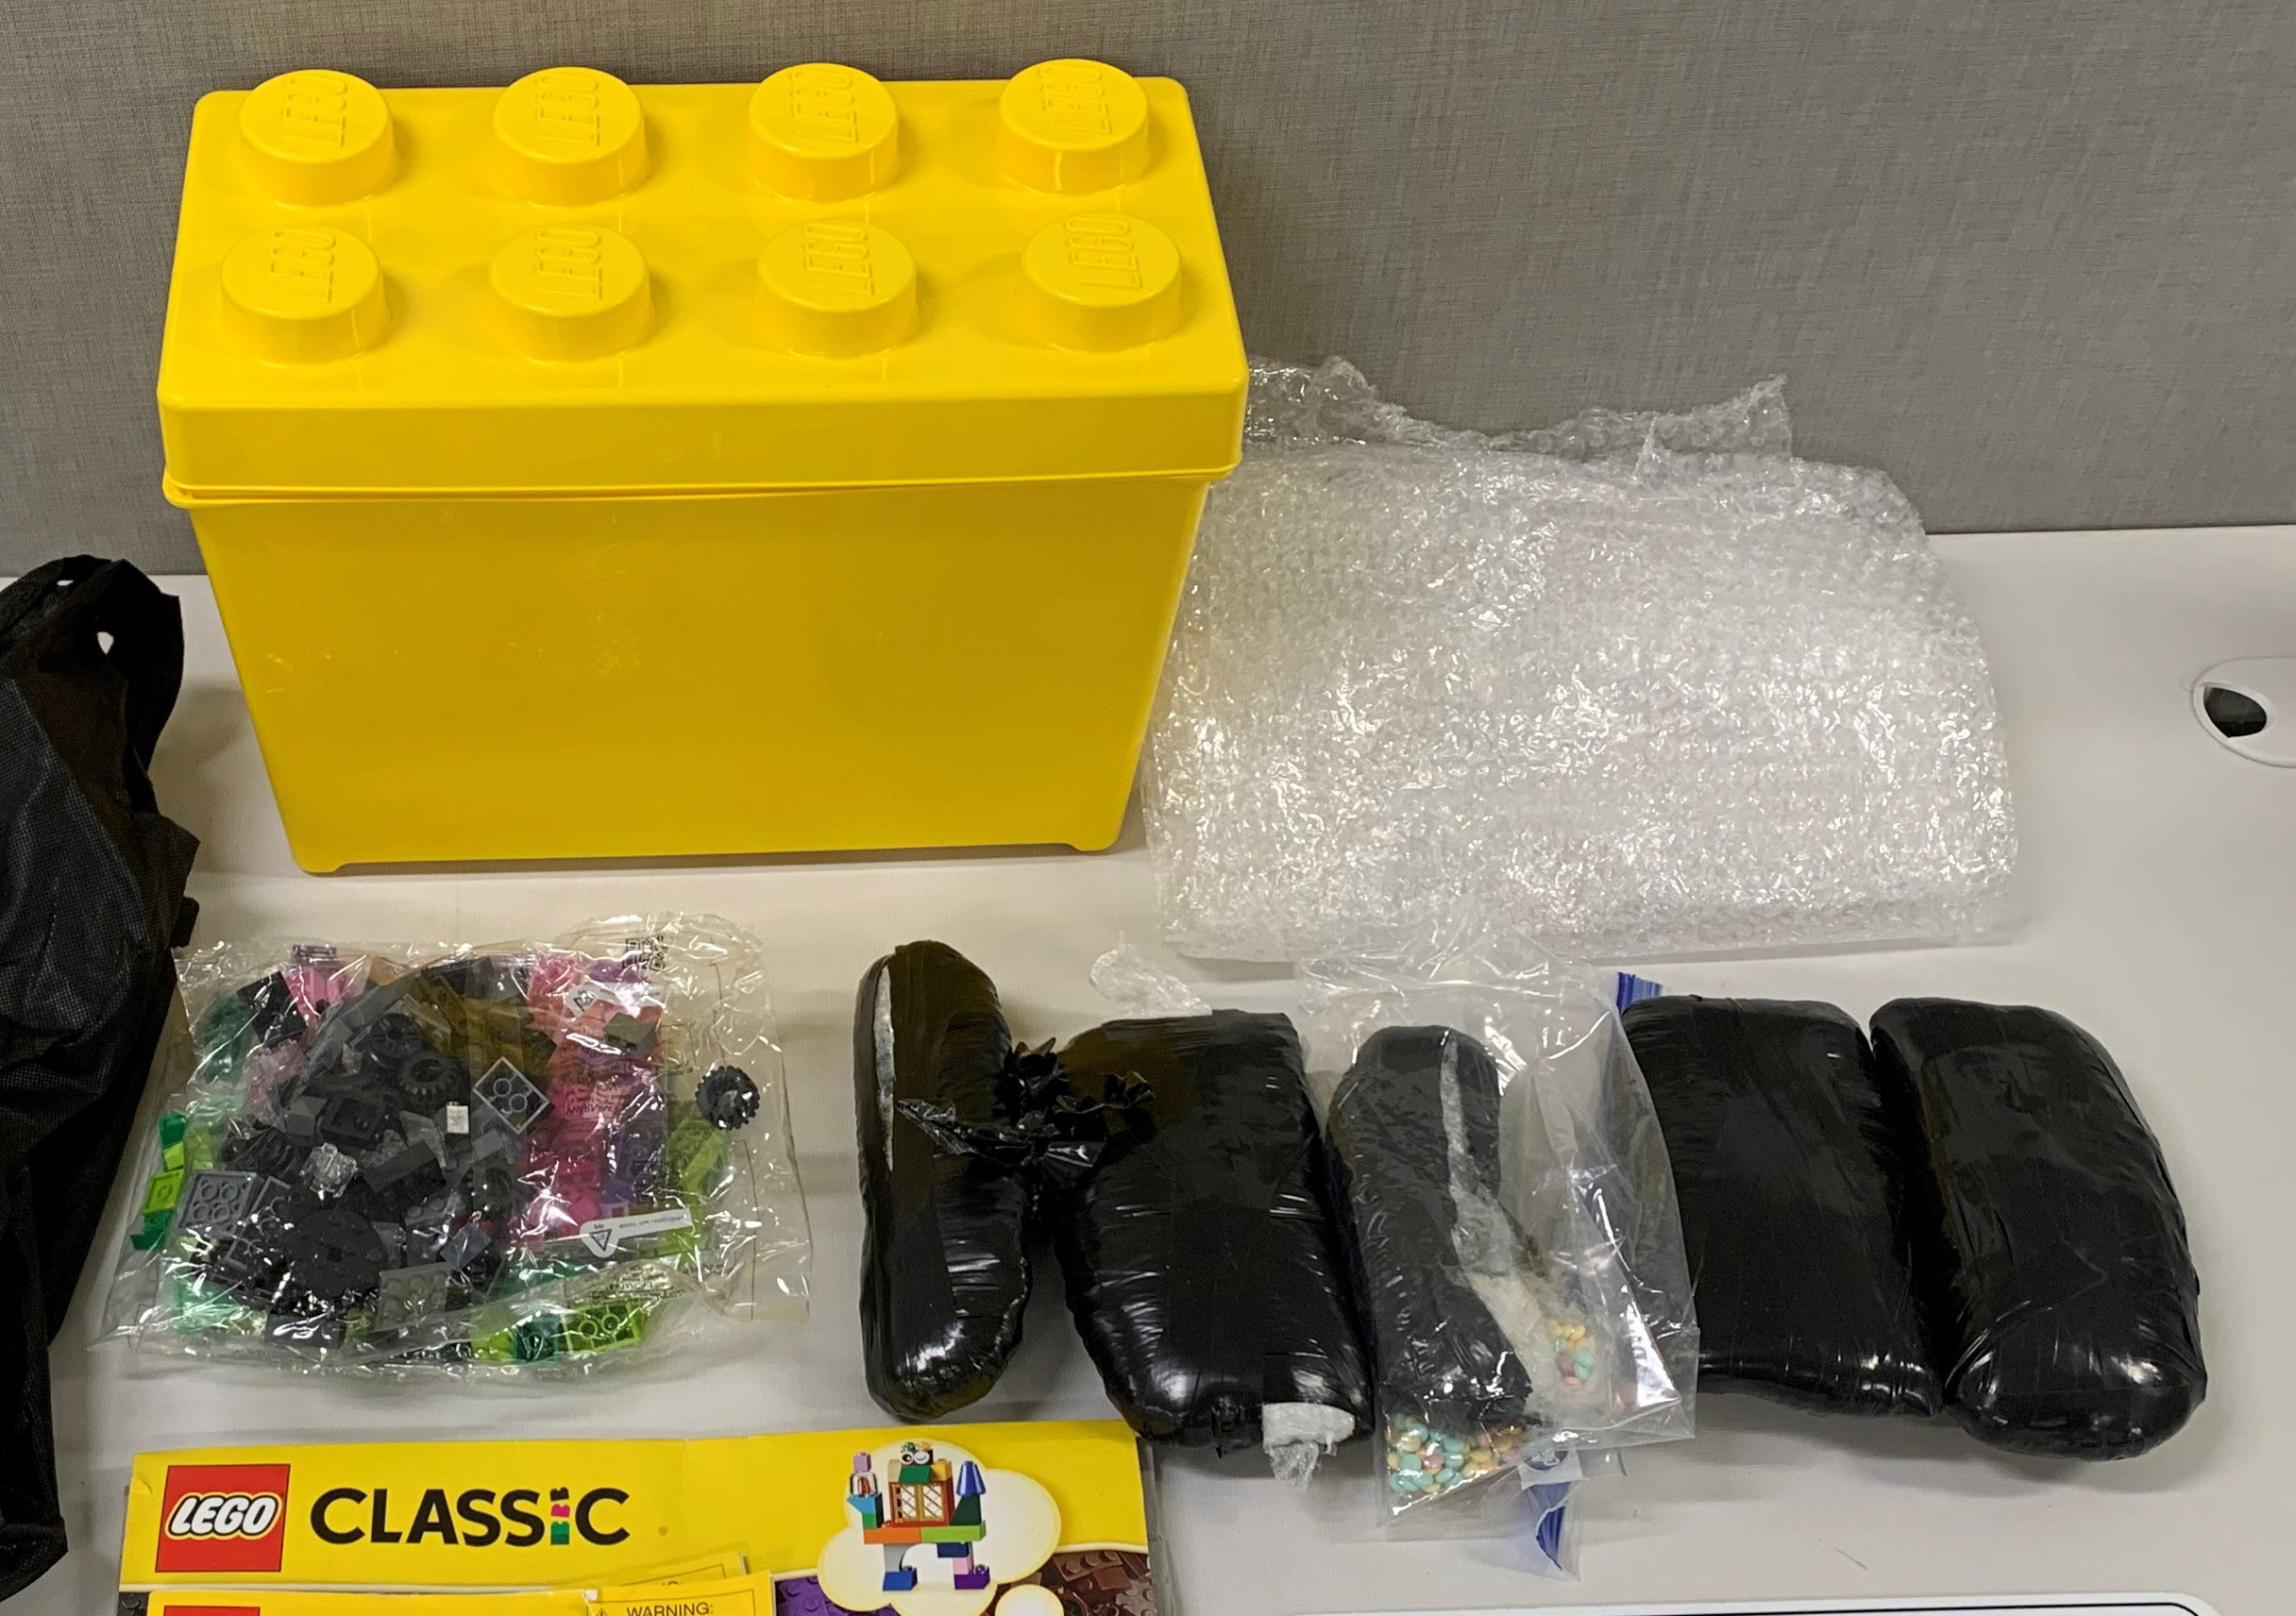 Drugs seized in box is NYC's biggest Rainbow fentanyl bust